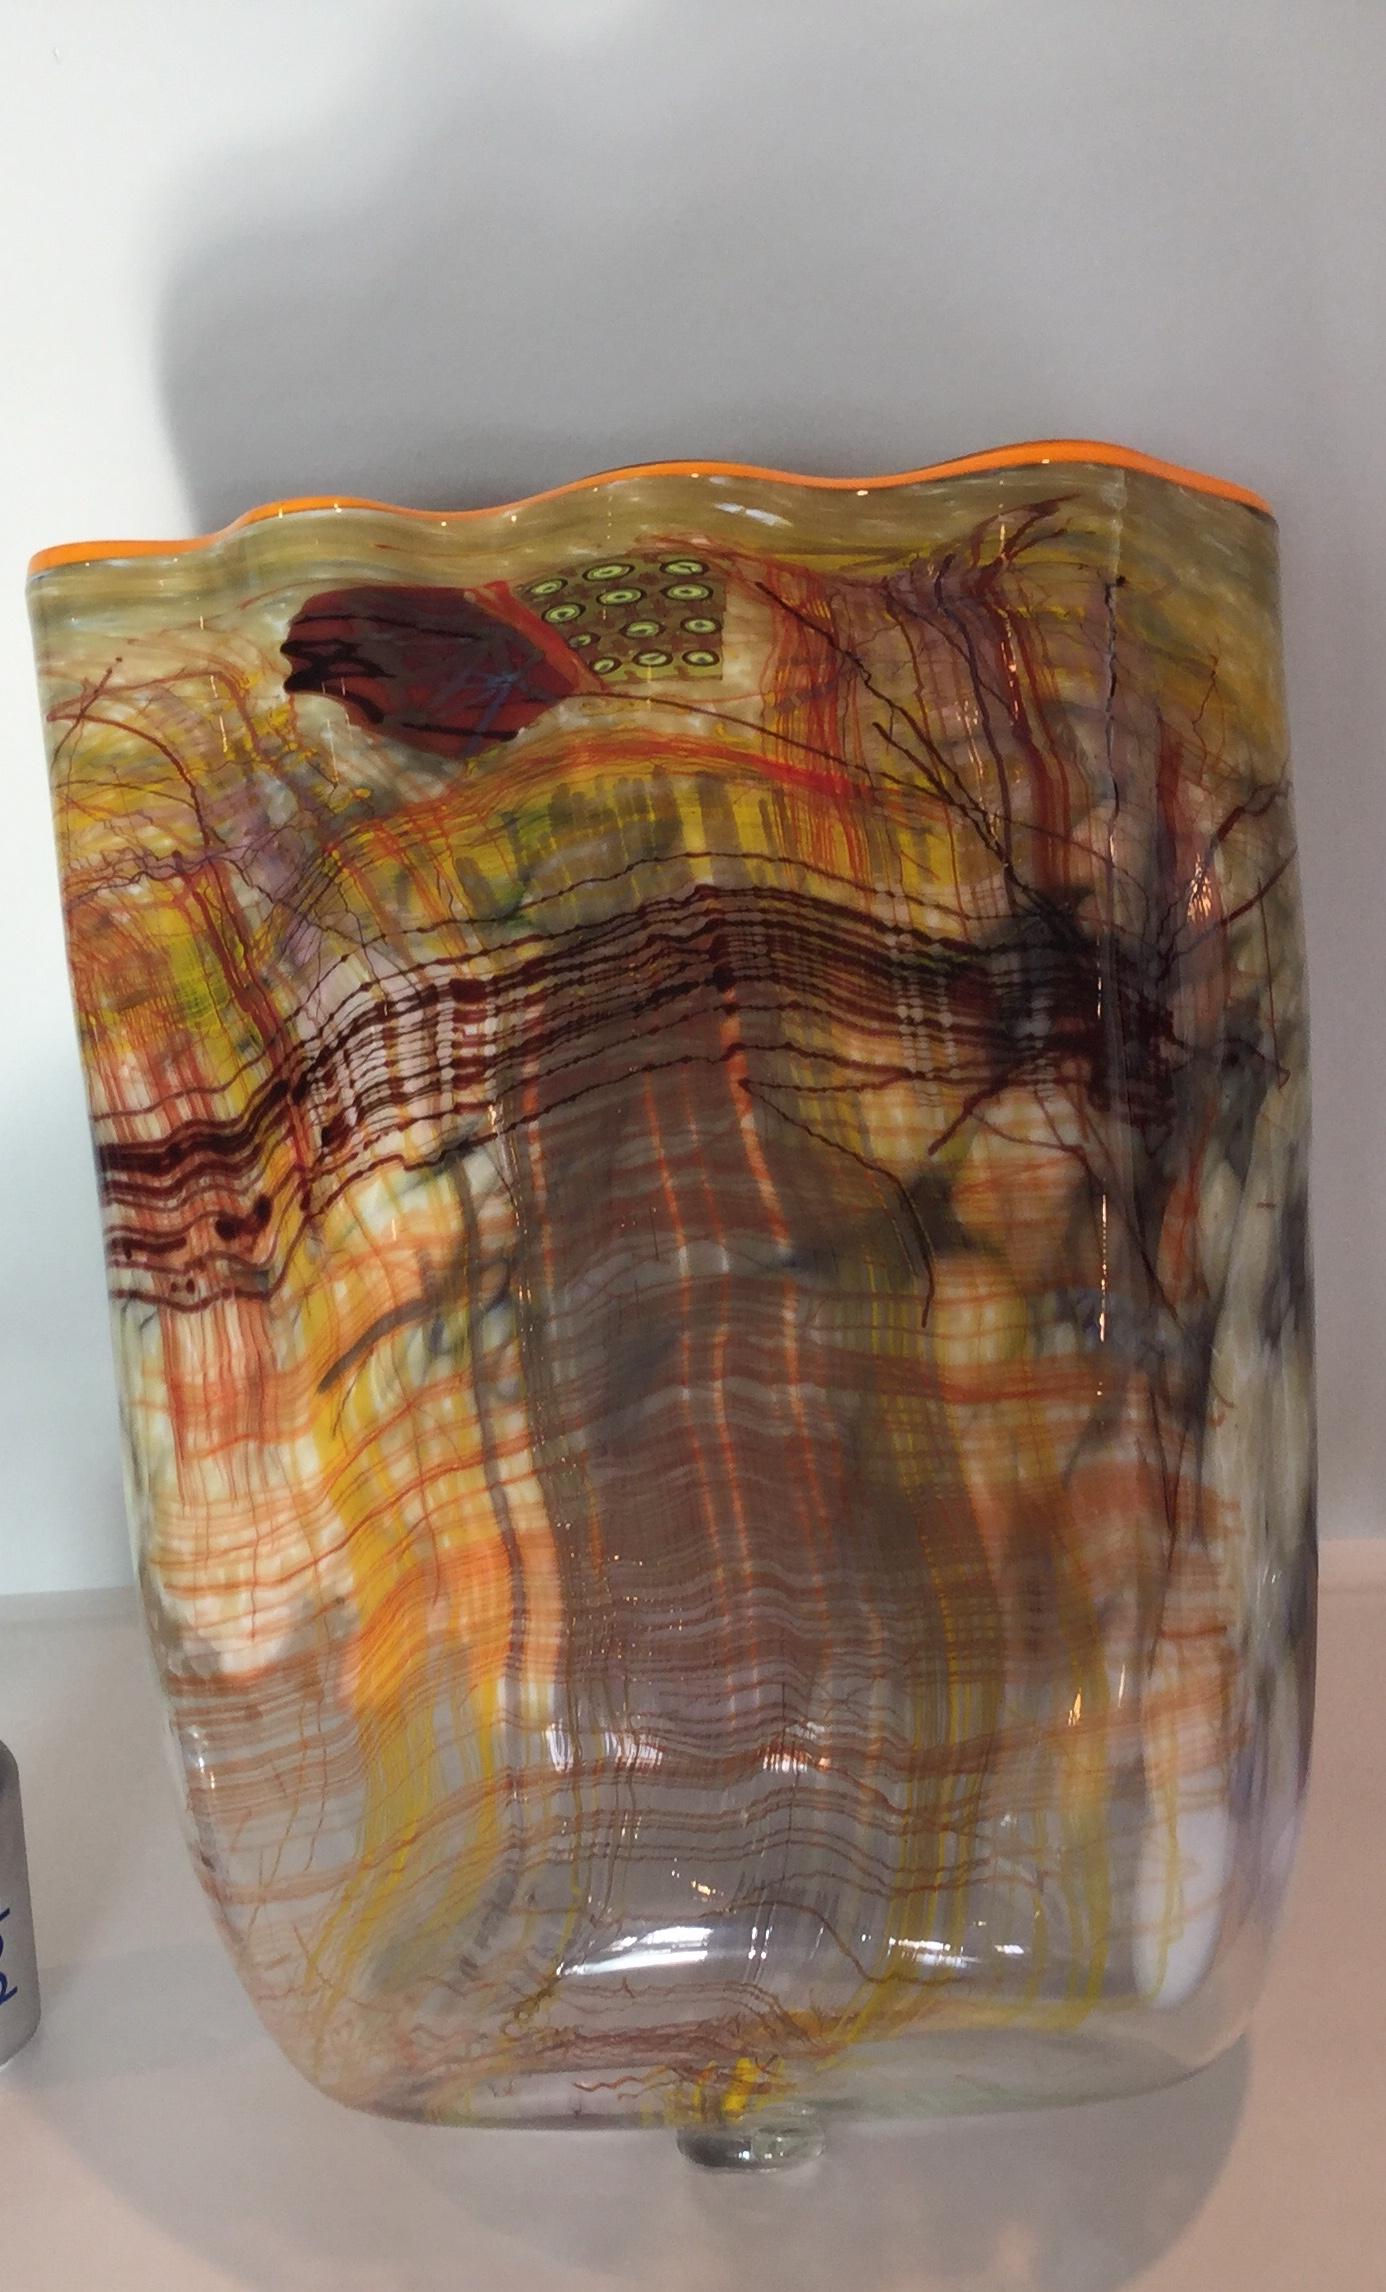 Blown Glass Monumental Dale Chihuly Sculptural Cylinder Vessel Signed and Dated 1987 